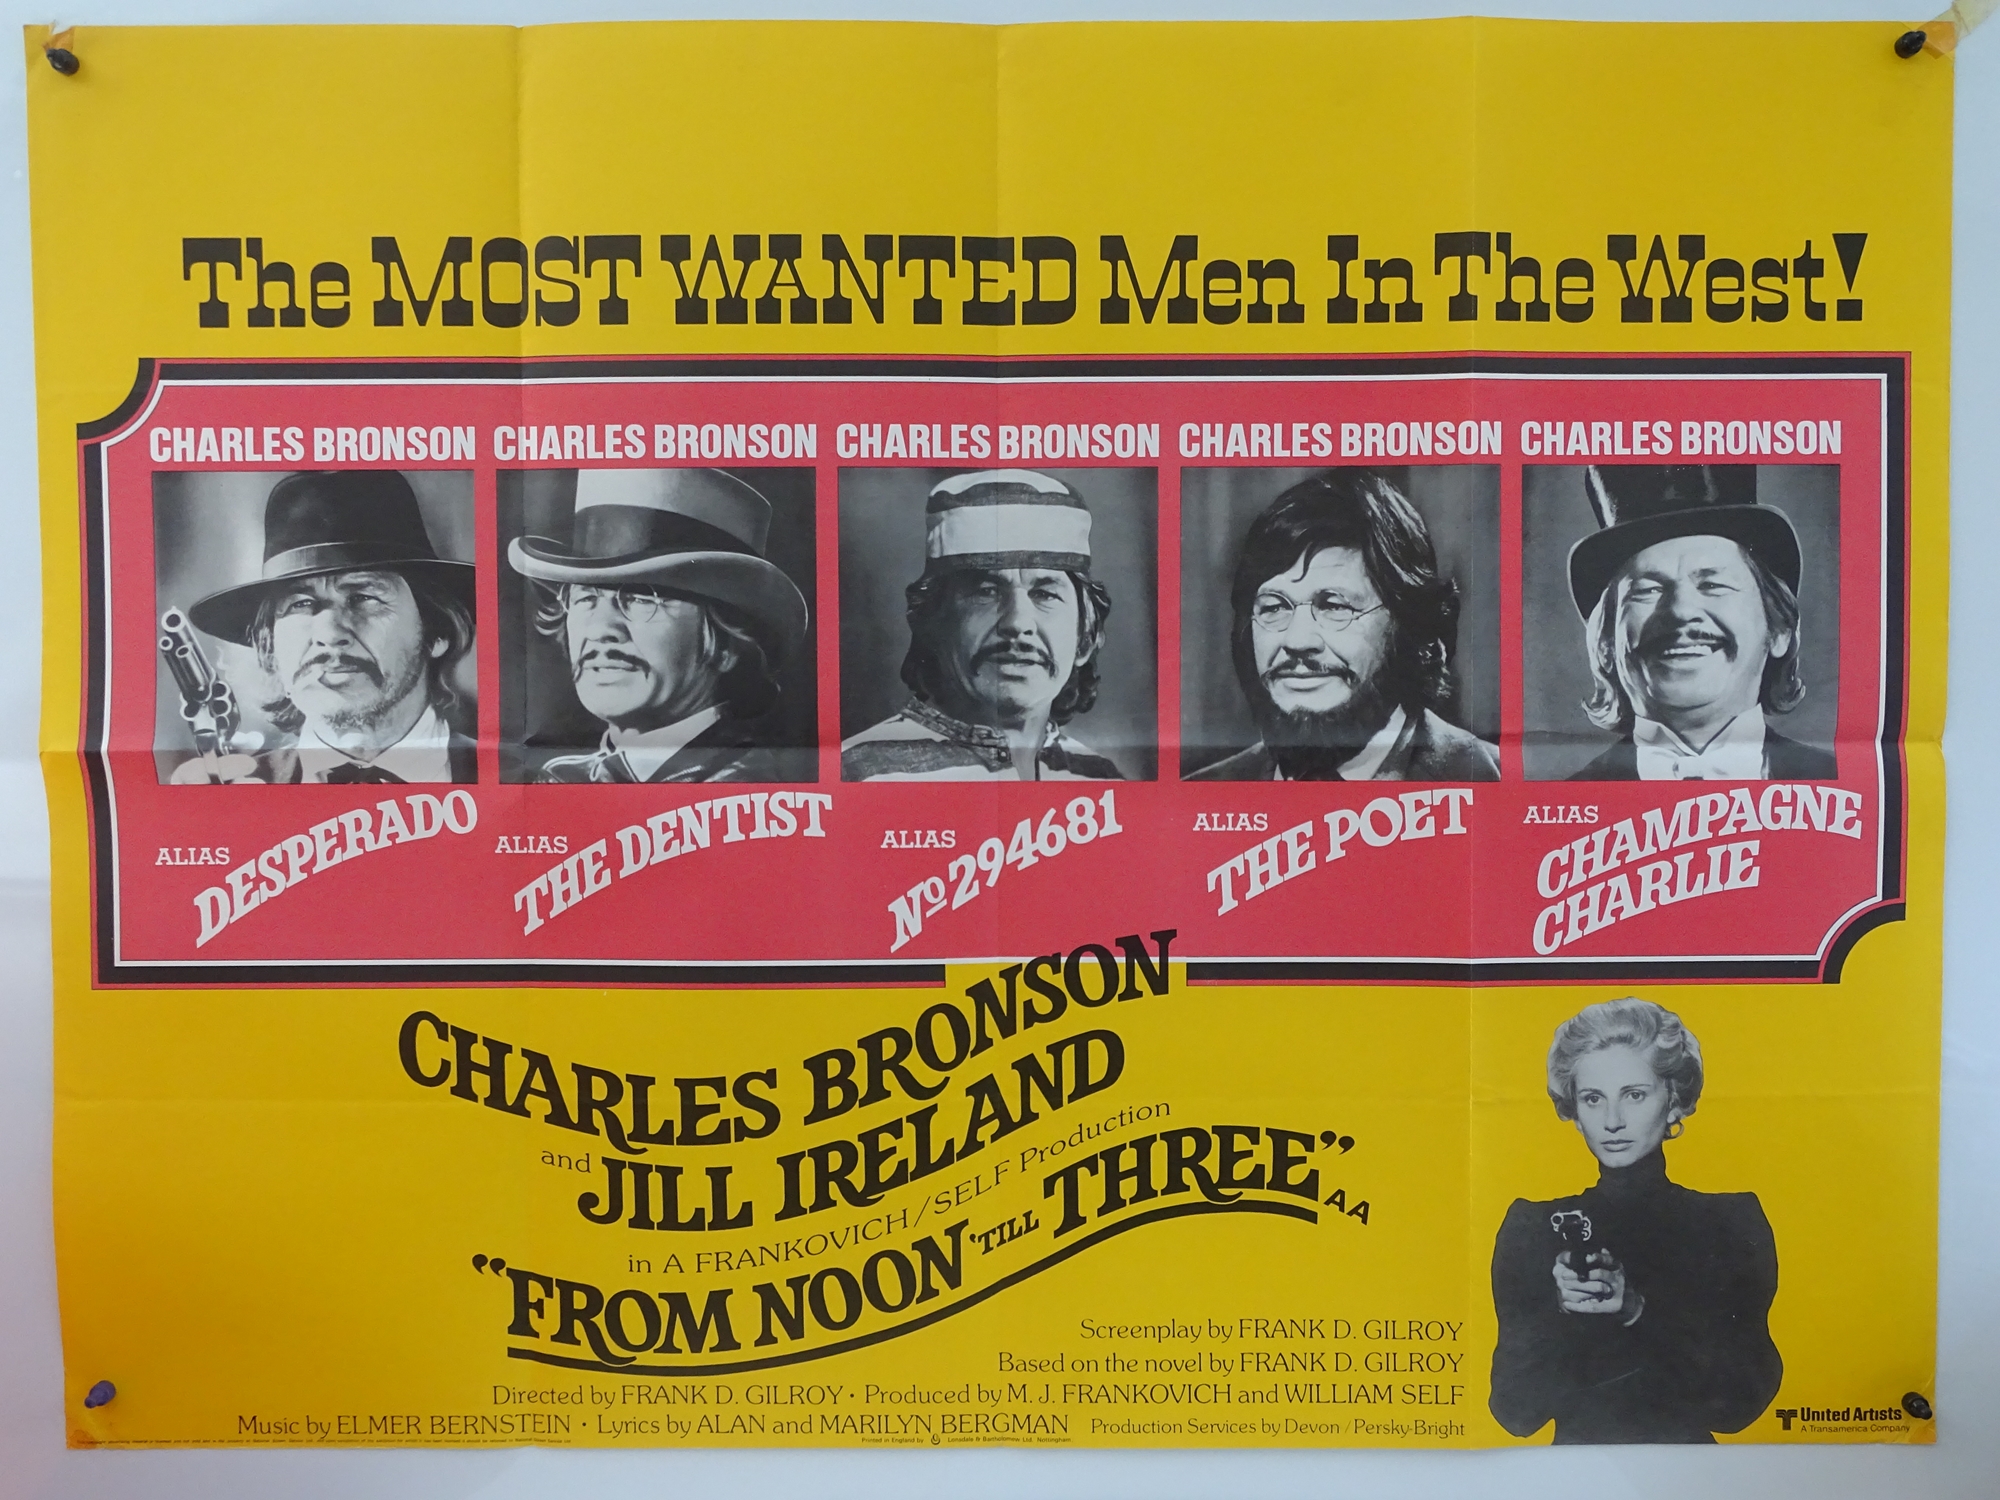 A SELECTION OF BRITISH UK QUAD WESTERN FILM POSTERS: THE LAST HARD MEN (1976), FROM NOON TILL - Image 2 of 3